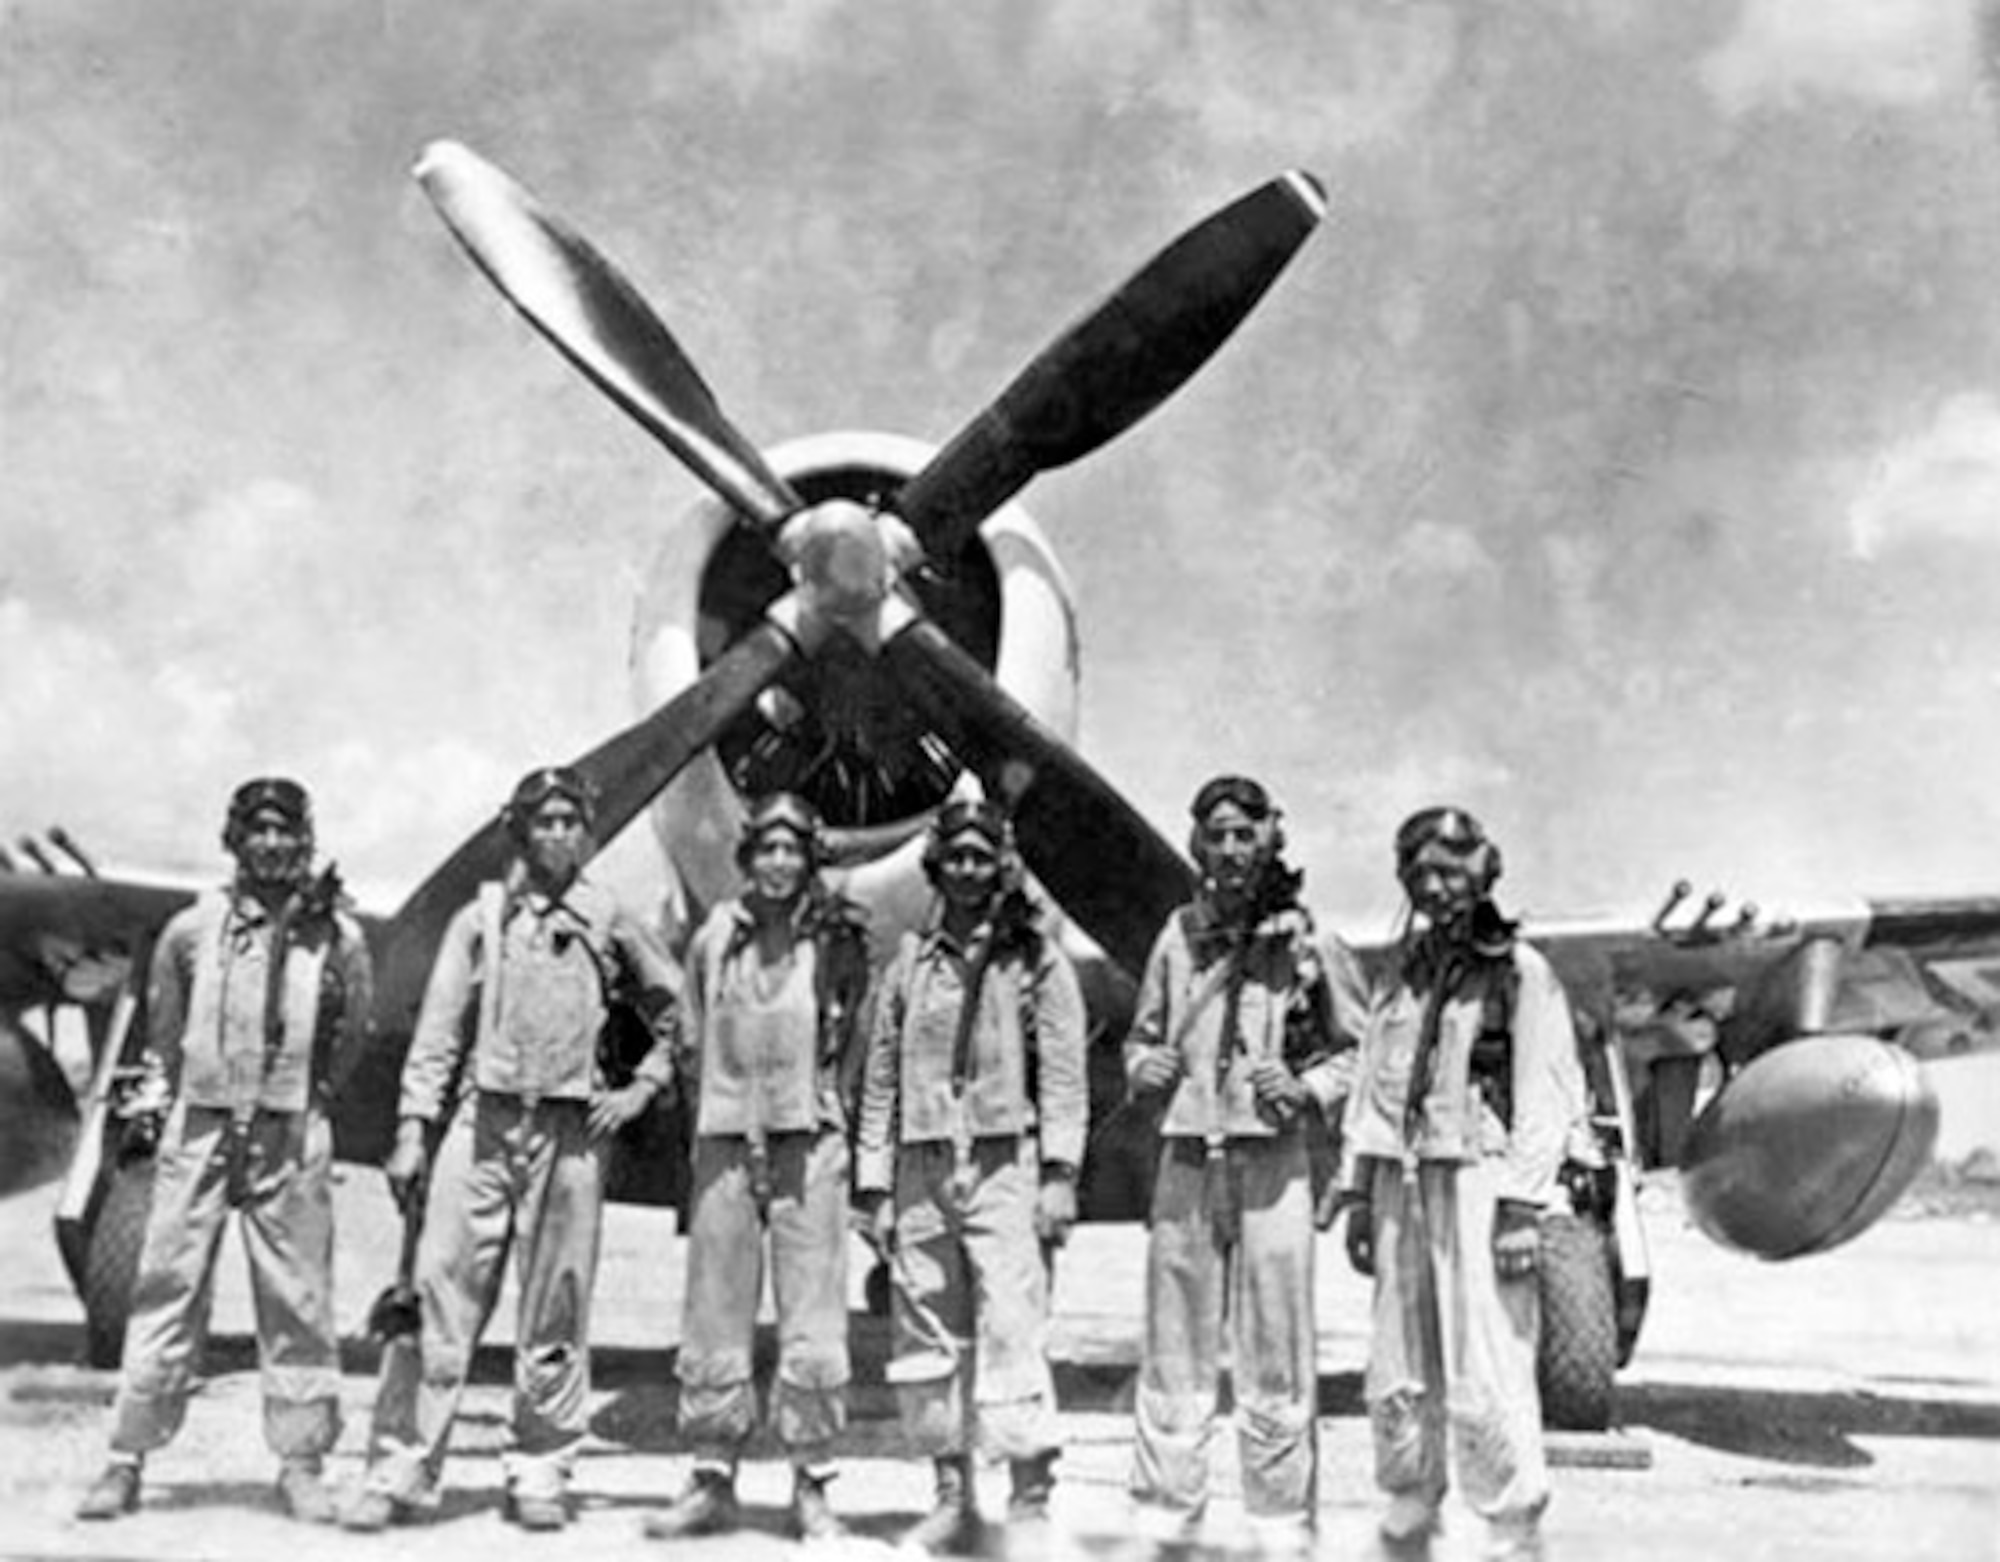 Mexican expeditionary air force pilots from the 201st Fighter Squadron are pictured before flying a combat mission in the Philippines during World War II. The squadron was known as the Aztec Eagles and fought alongside Allied Nations. (U.S. Air Force photo)